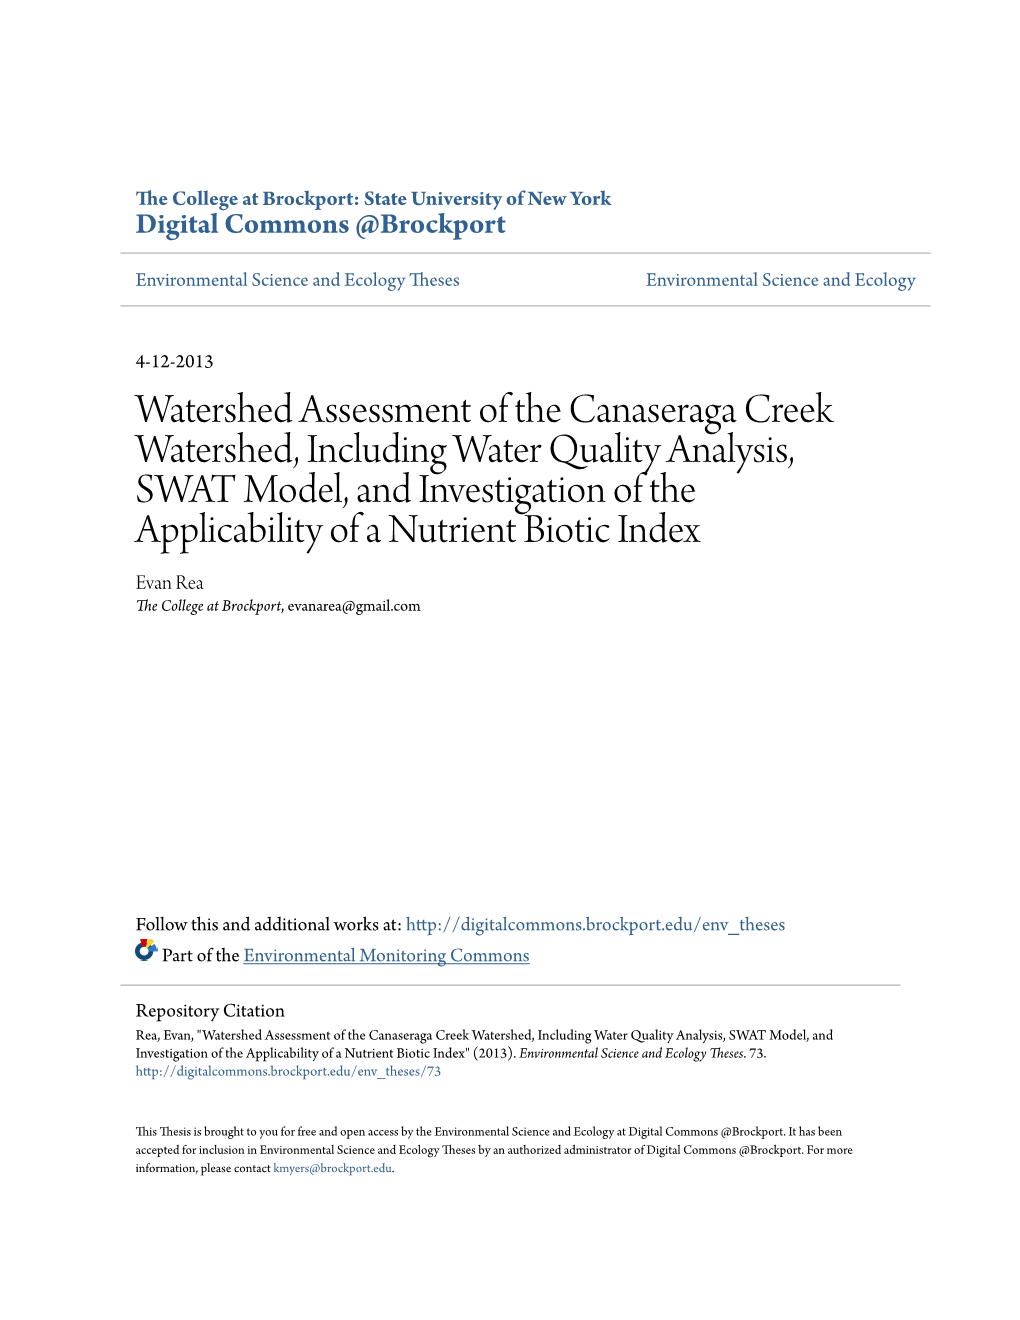 Watershed Assessment of the Canaseraga Creek